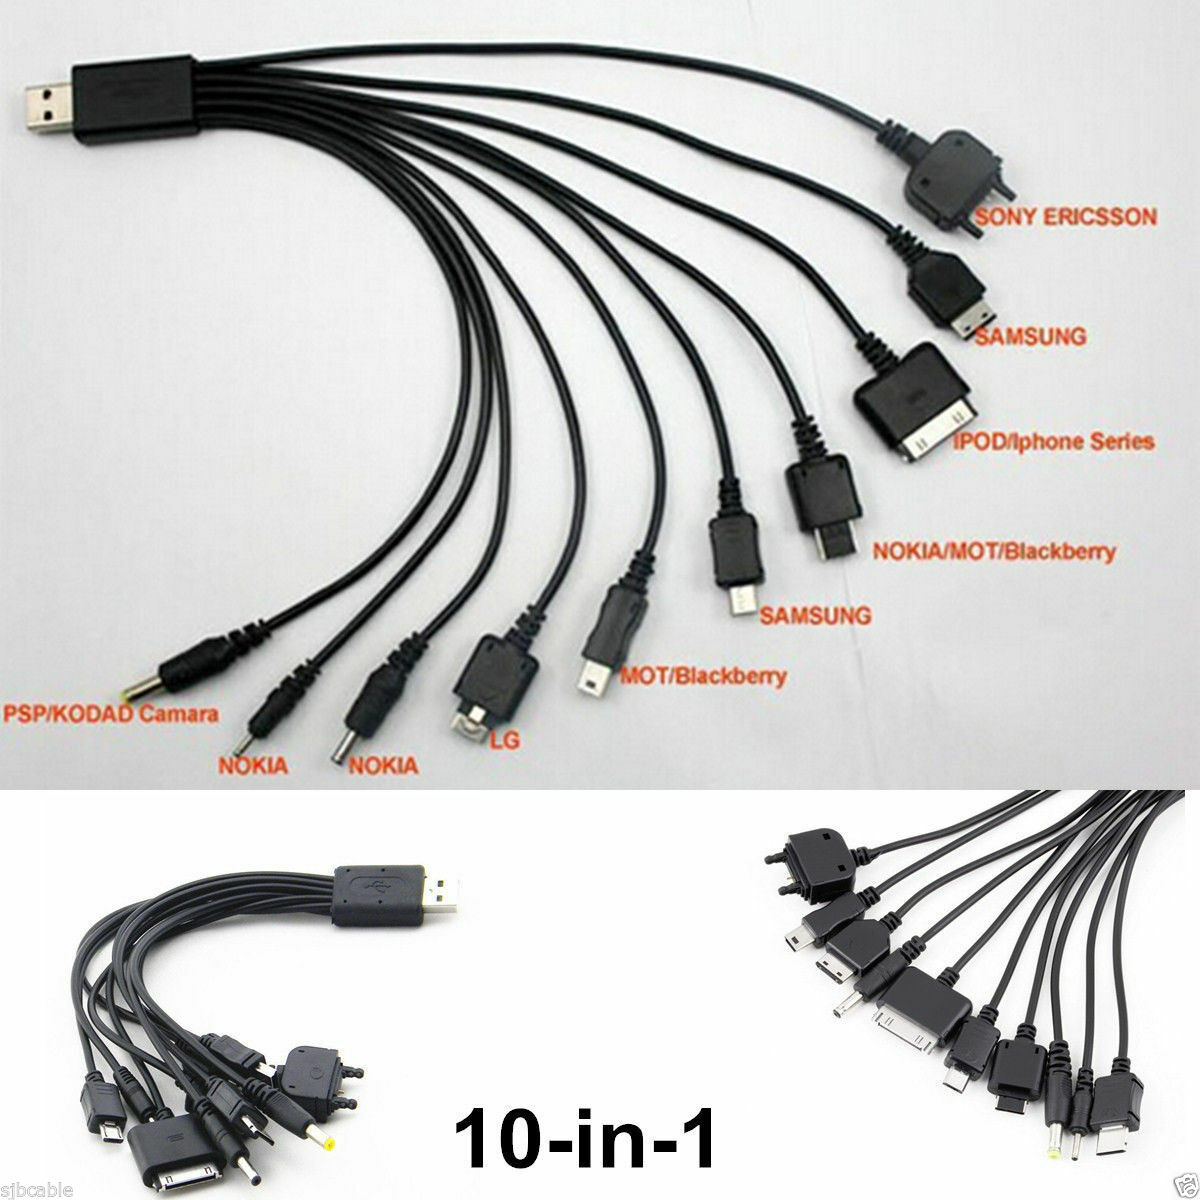 SEDSED The Umbrella Academy 2 Multi Charging Cable Multi Charger Cable 3 in 1 Charging Cable Universal Charger Cord with Type C//Micro USB Port Compatible with Cell Phone Tablets More